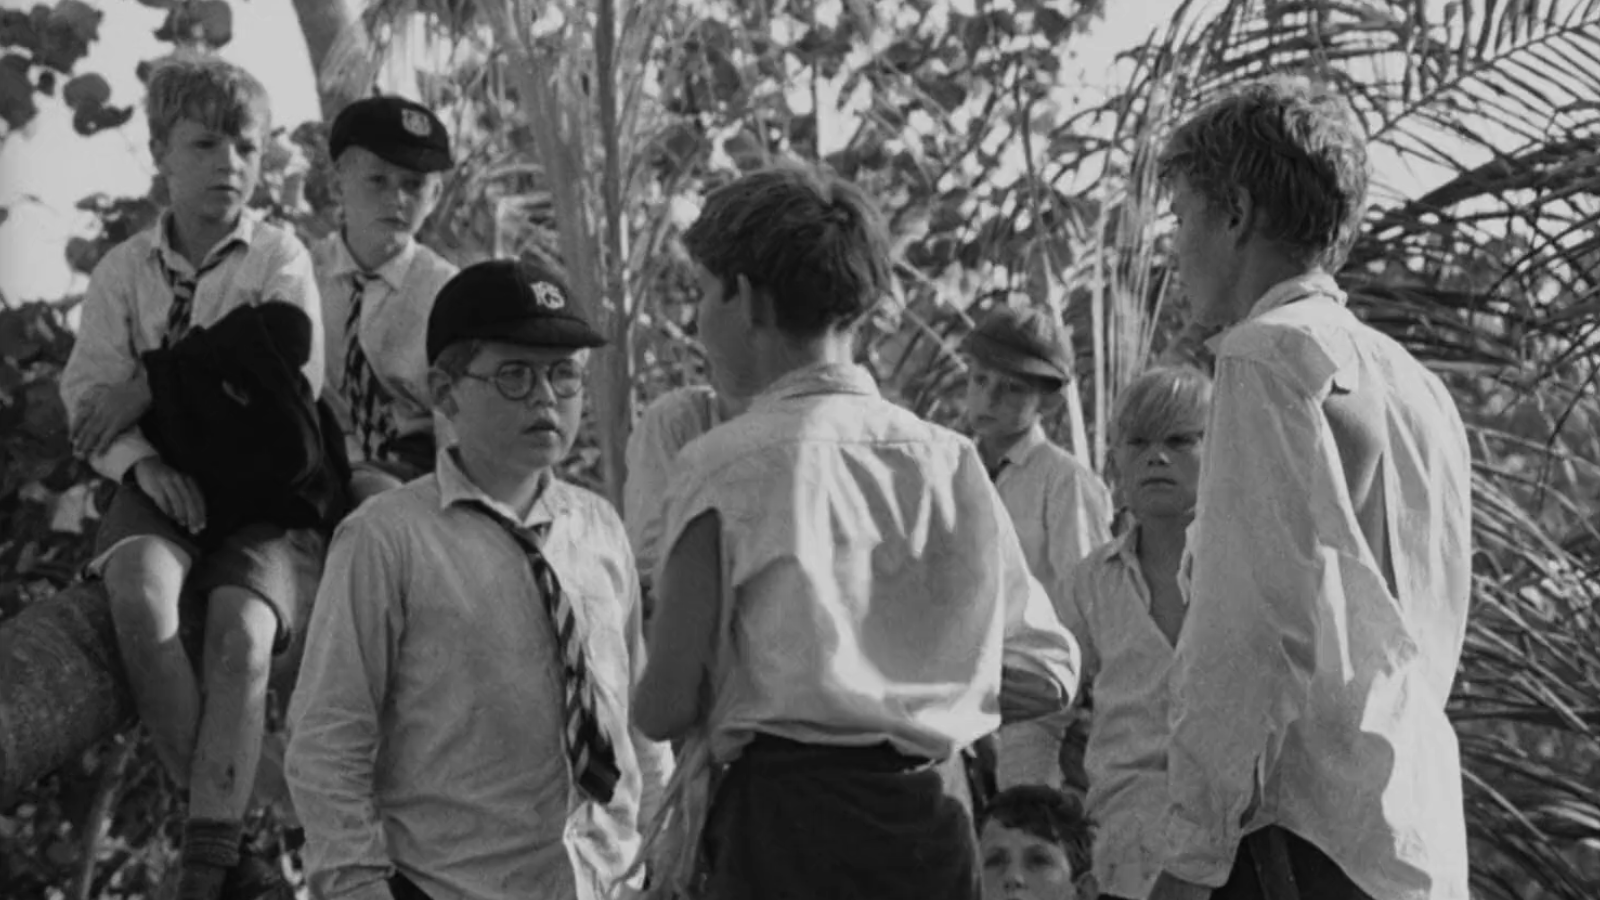 lord of the flies movie review essay